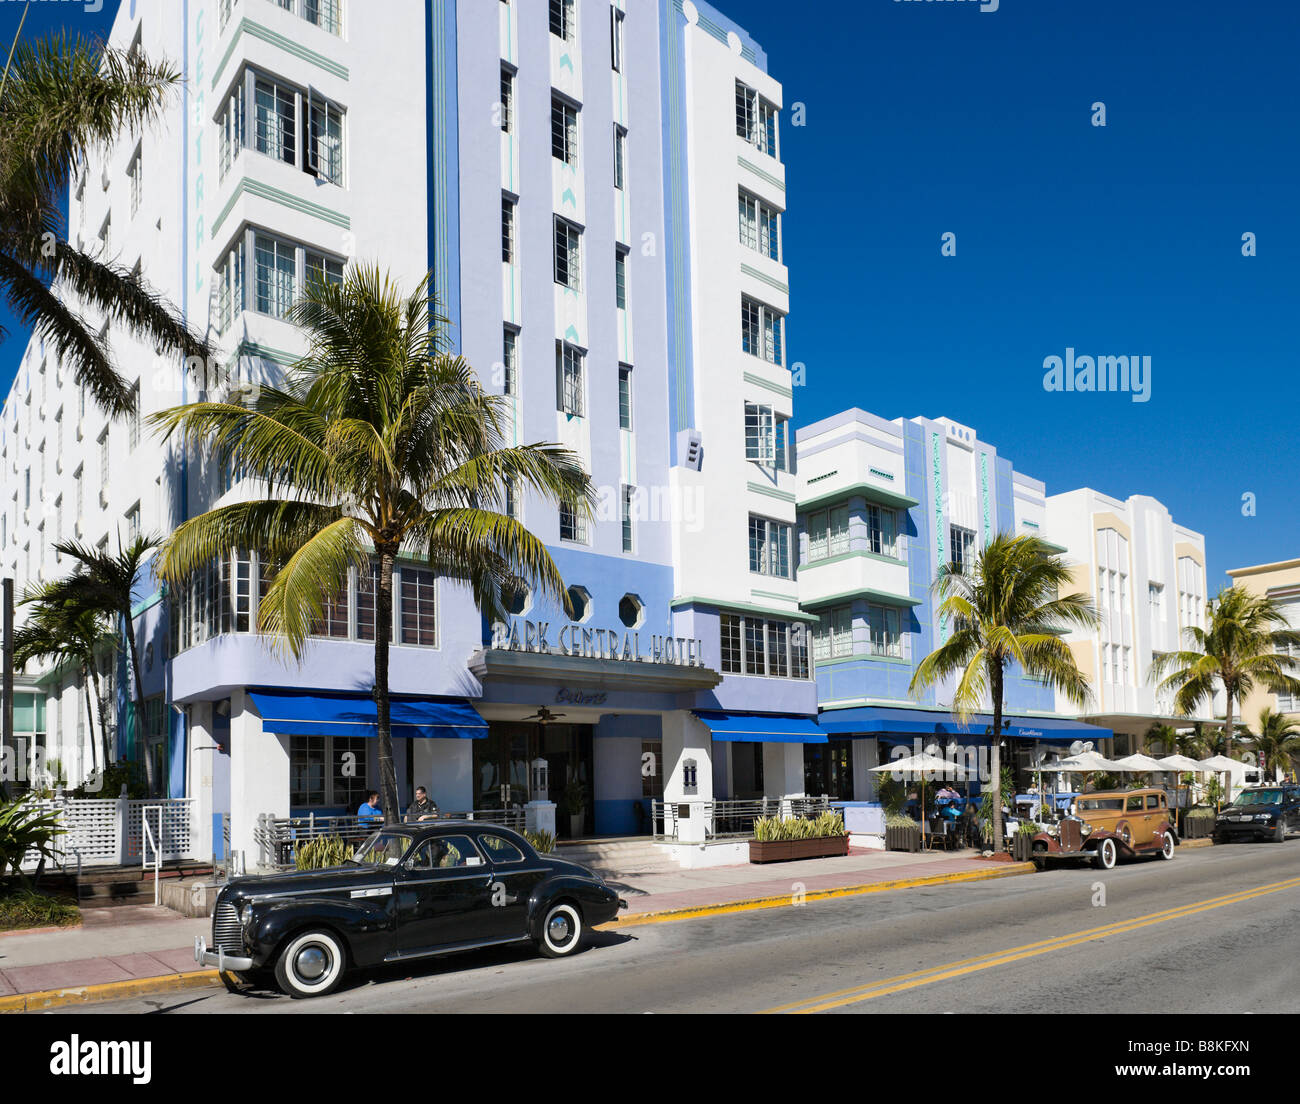 Vintage cars in front of the art deco Park Central Hotel on Ocean Drive, South Beach, Miami Beach, Florida Stock Photo